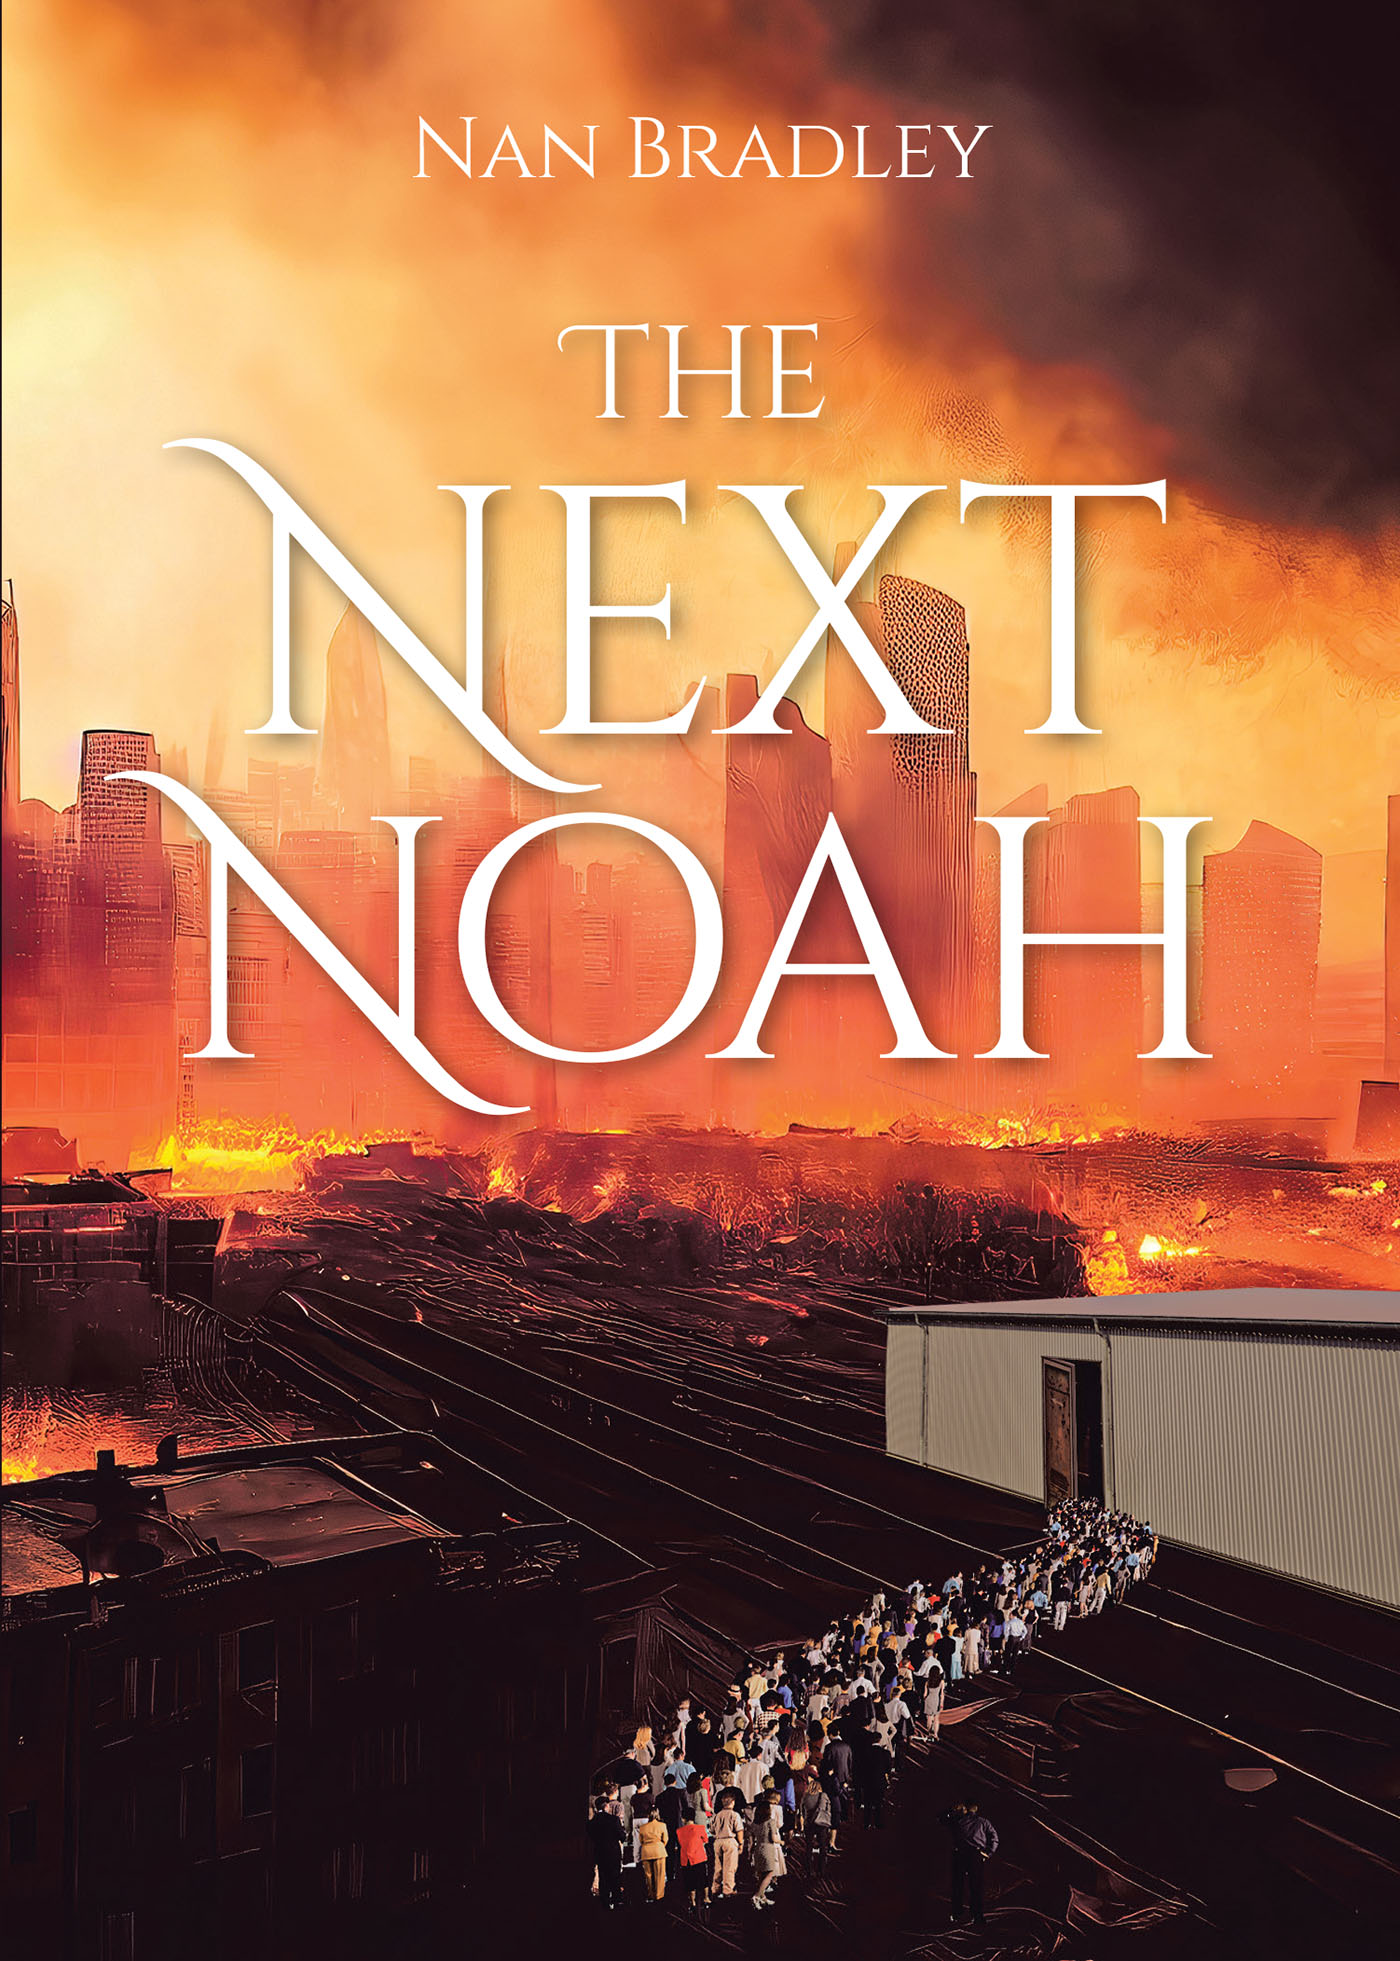 Nan Bradley’s Newly Released "The Next Noah" is a Collection of Personal Miracles Witnessed by the Author Over Several Decades